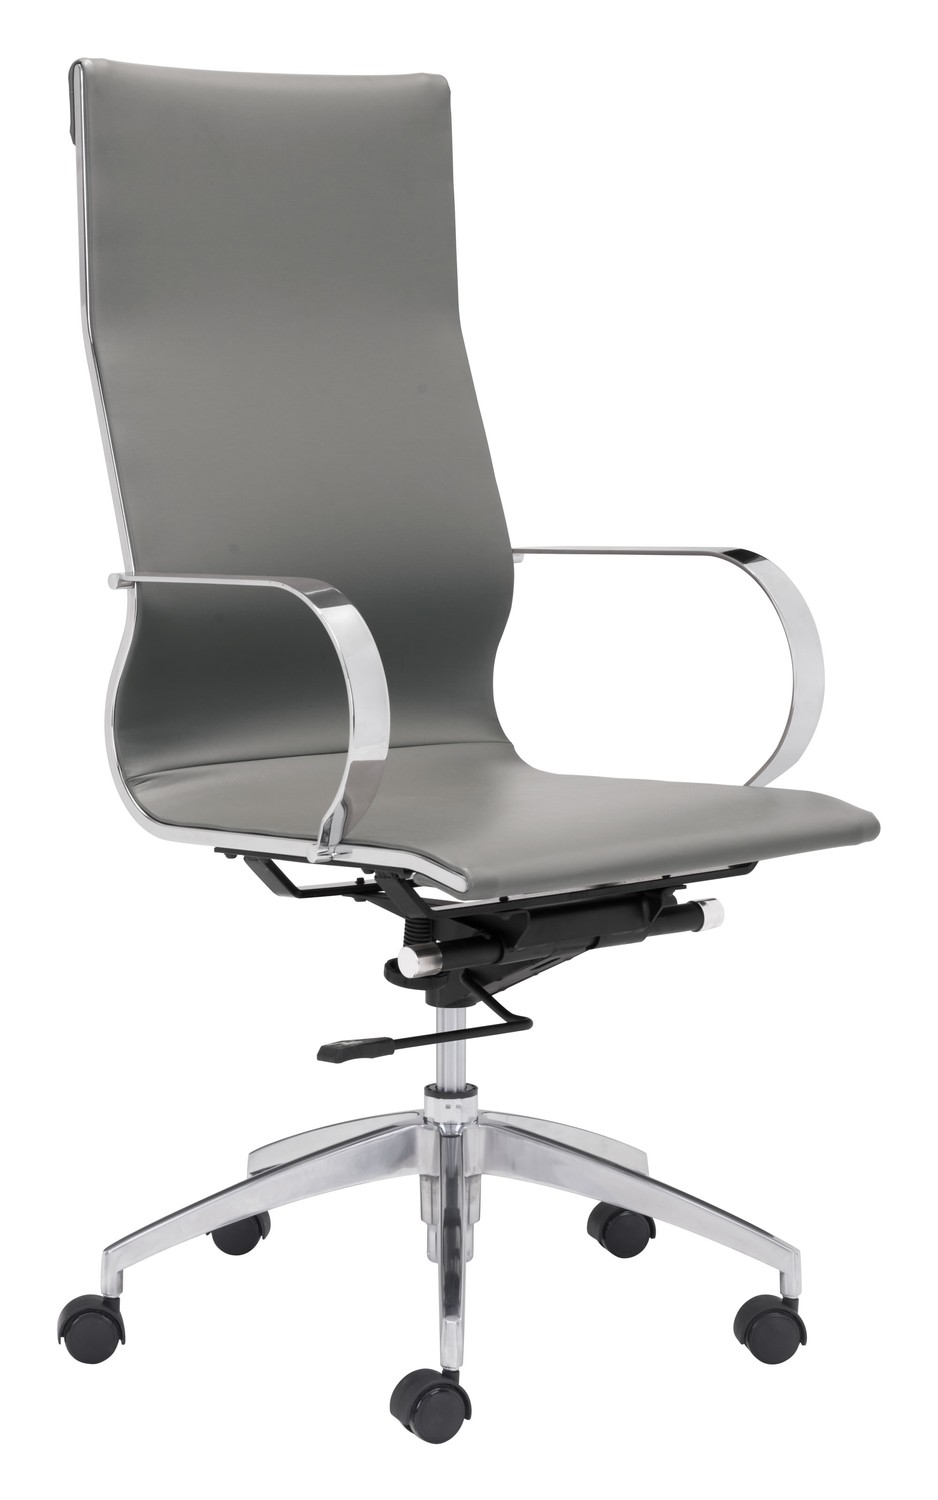 27.6" x 27.6" x 42.9" Gray, Leatherette, Chromed Steel, High Back Office Chair